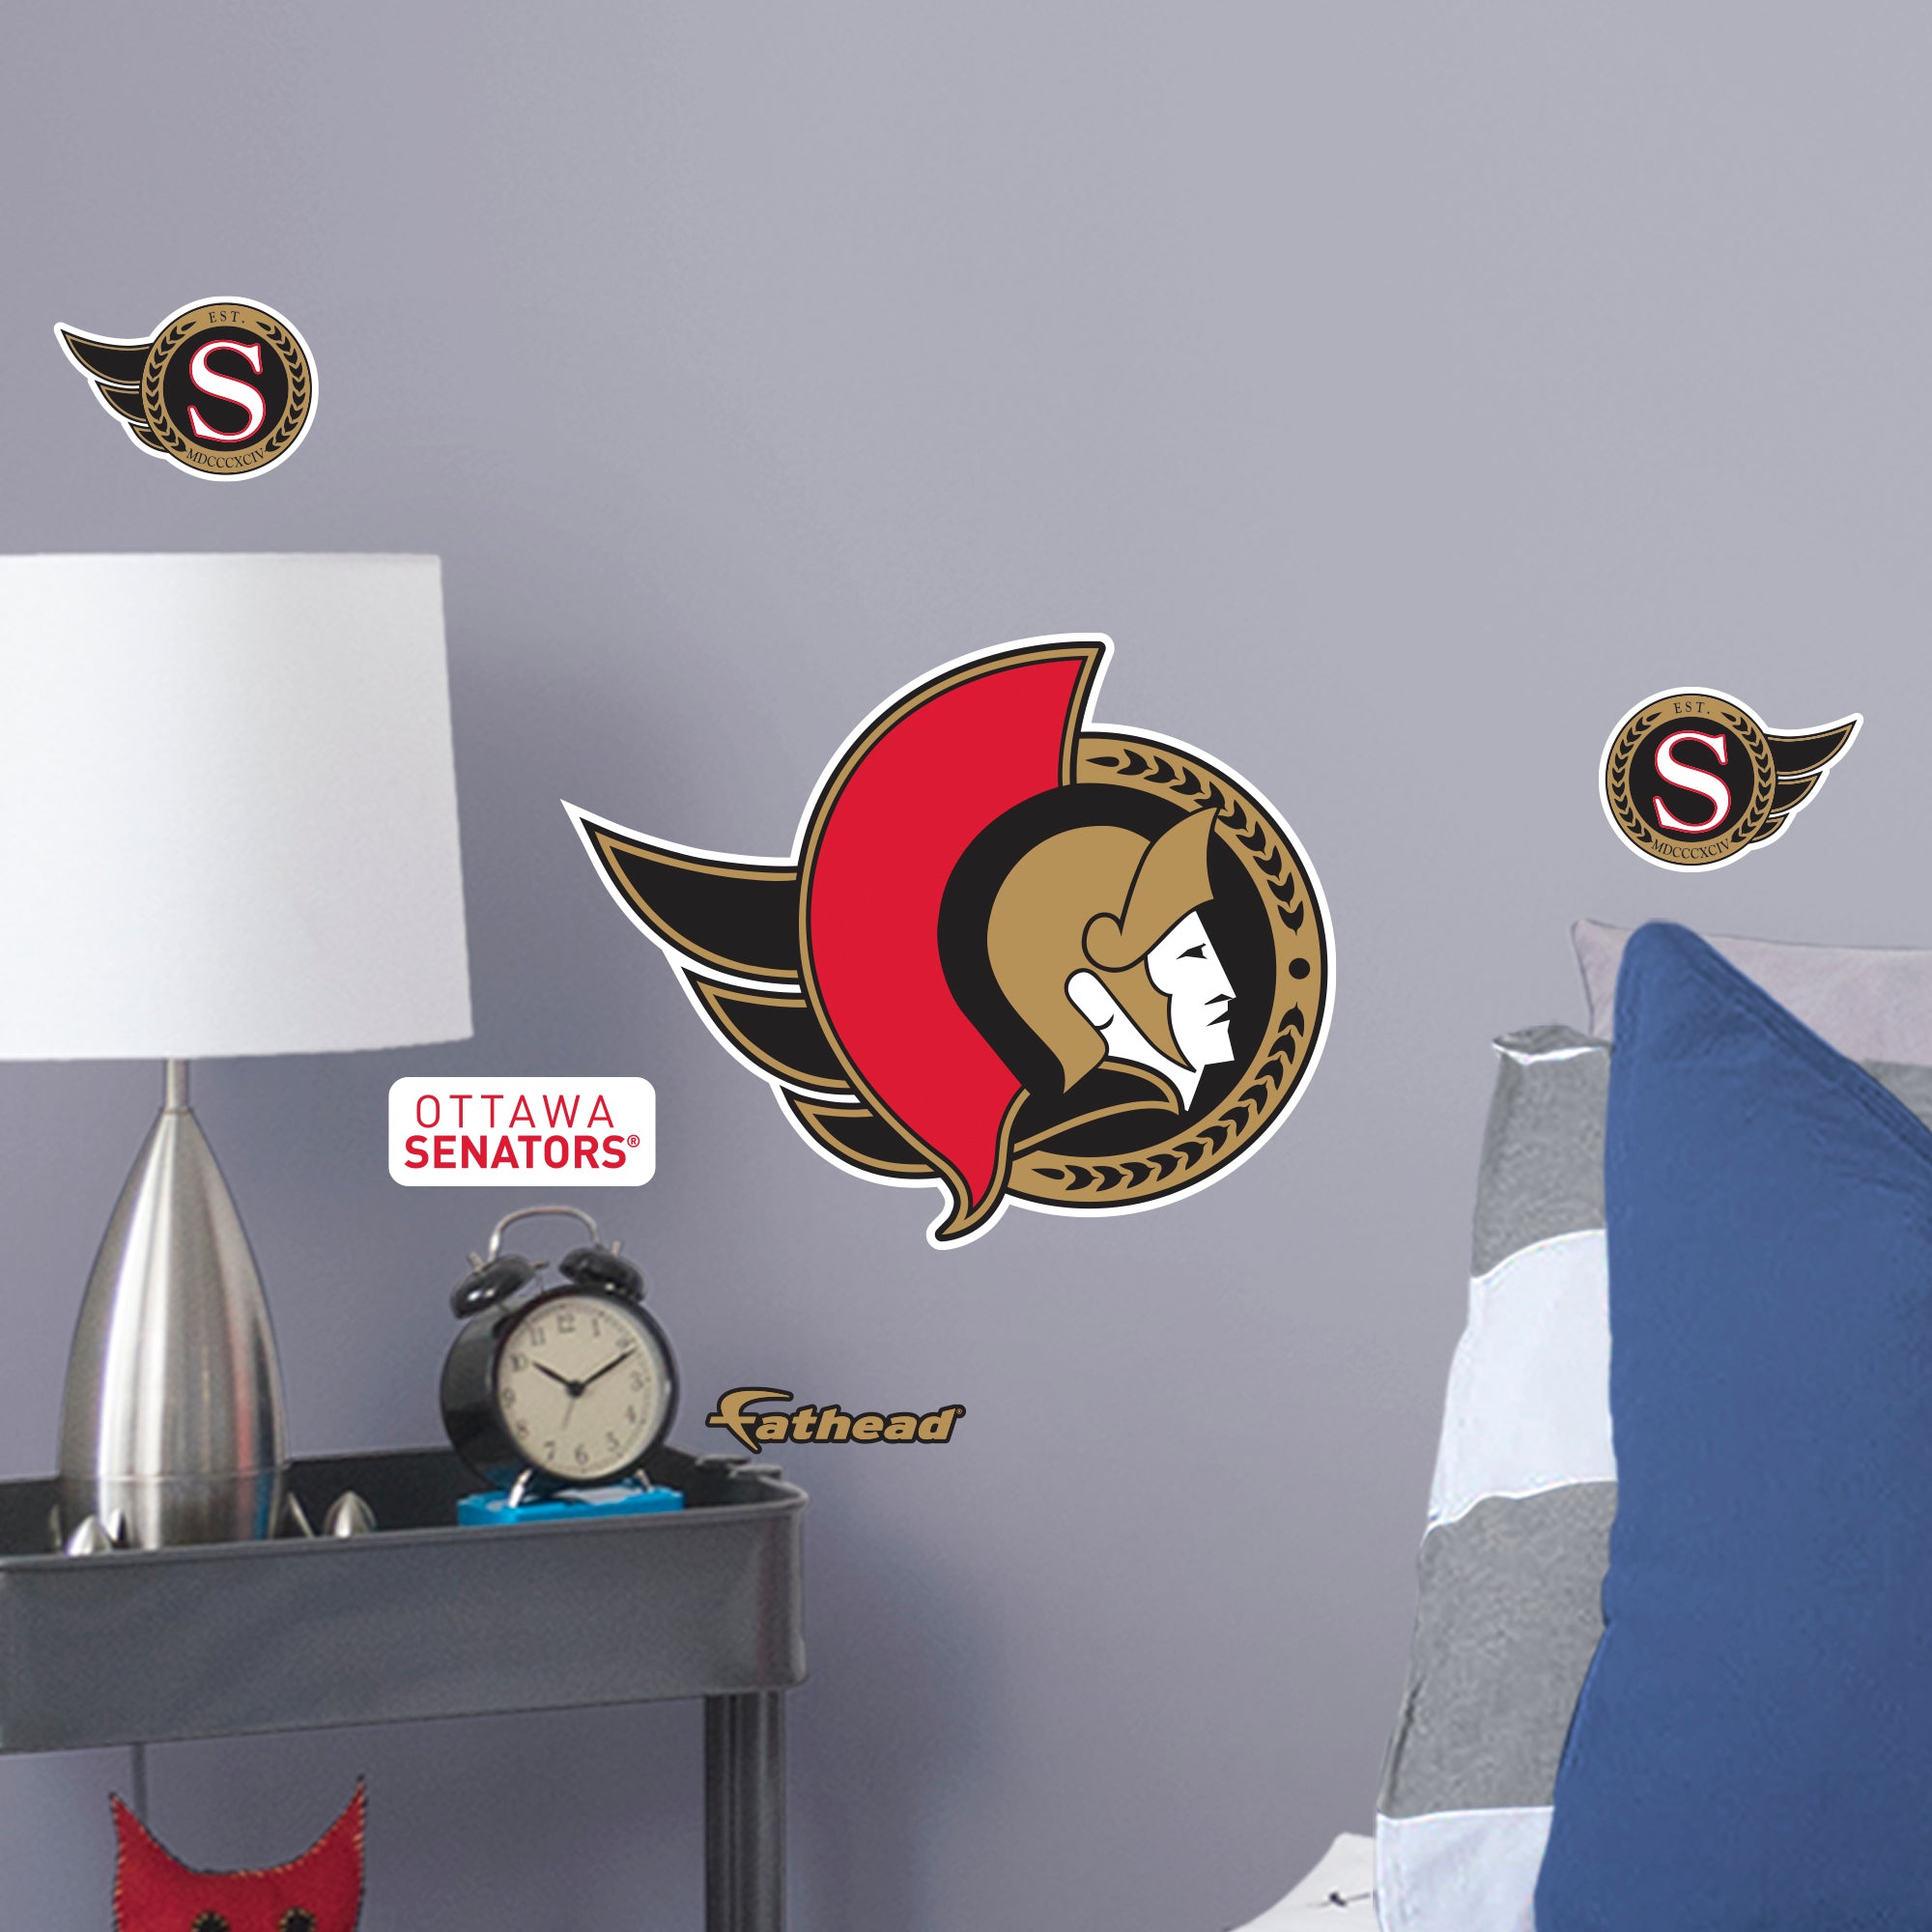 Ottawa Senators 2020 POD Teammate Logo - Officially Licensed NHL Removable Wall Decal Large by Fathead | Vinyl